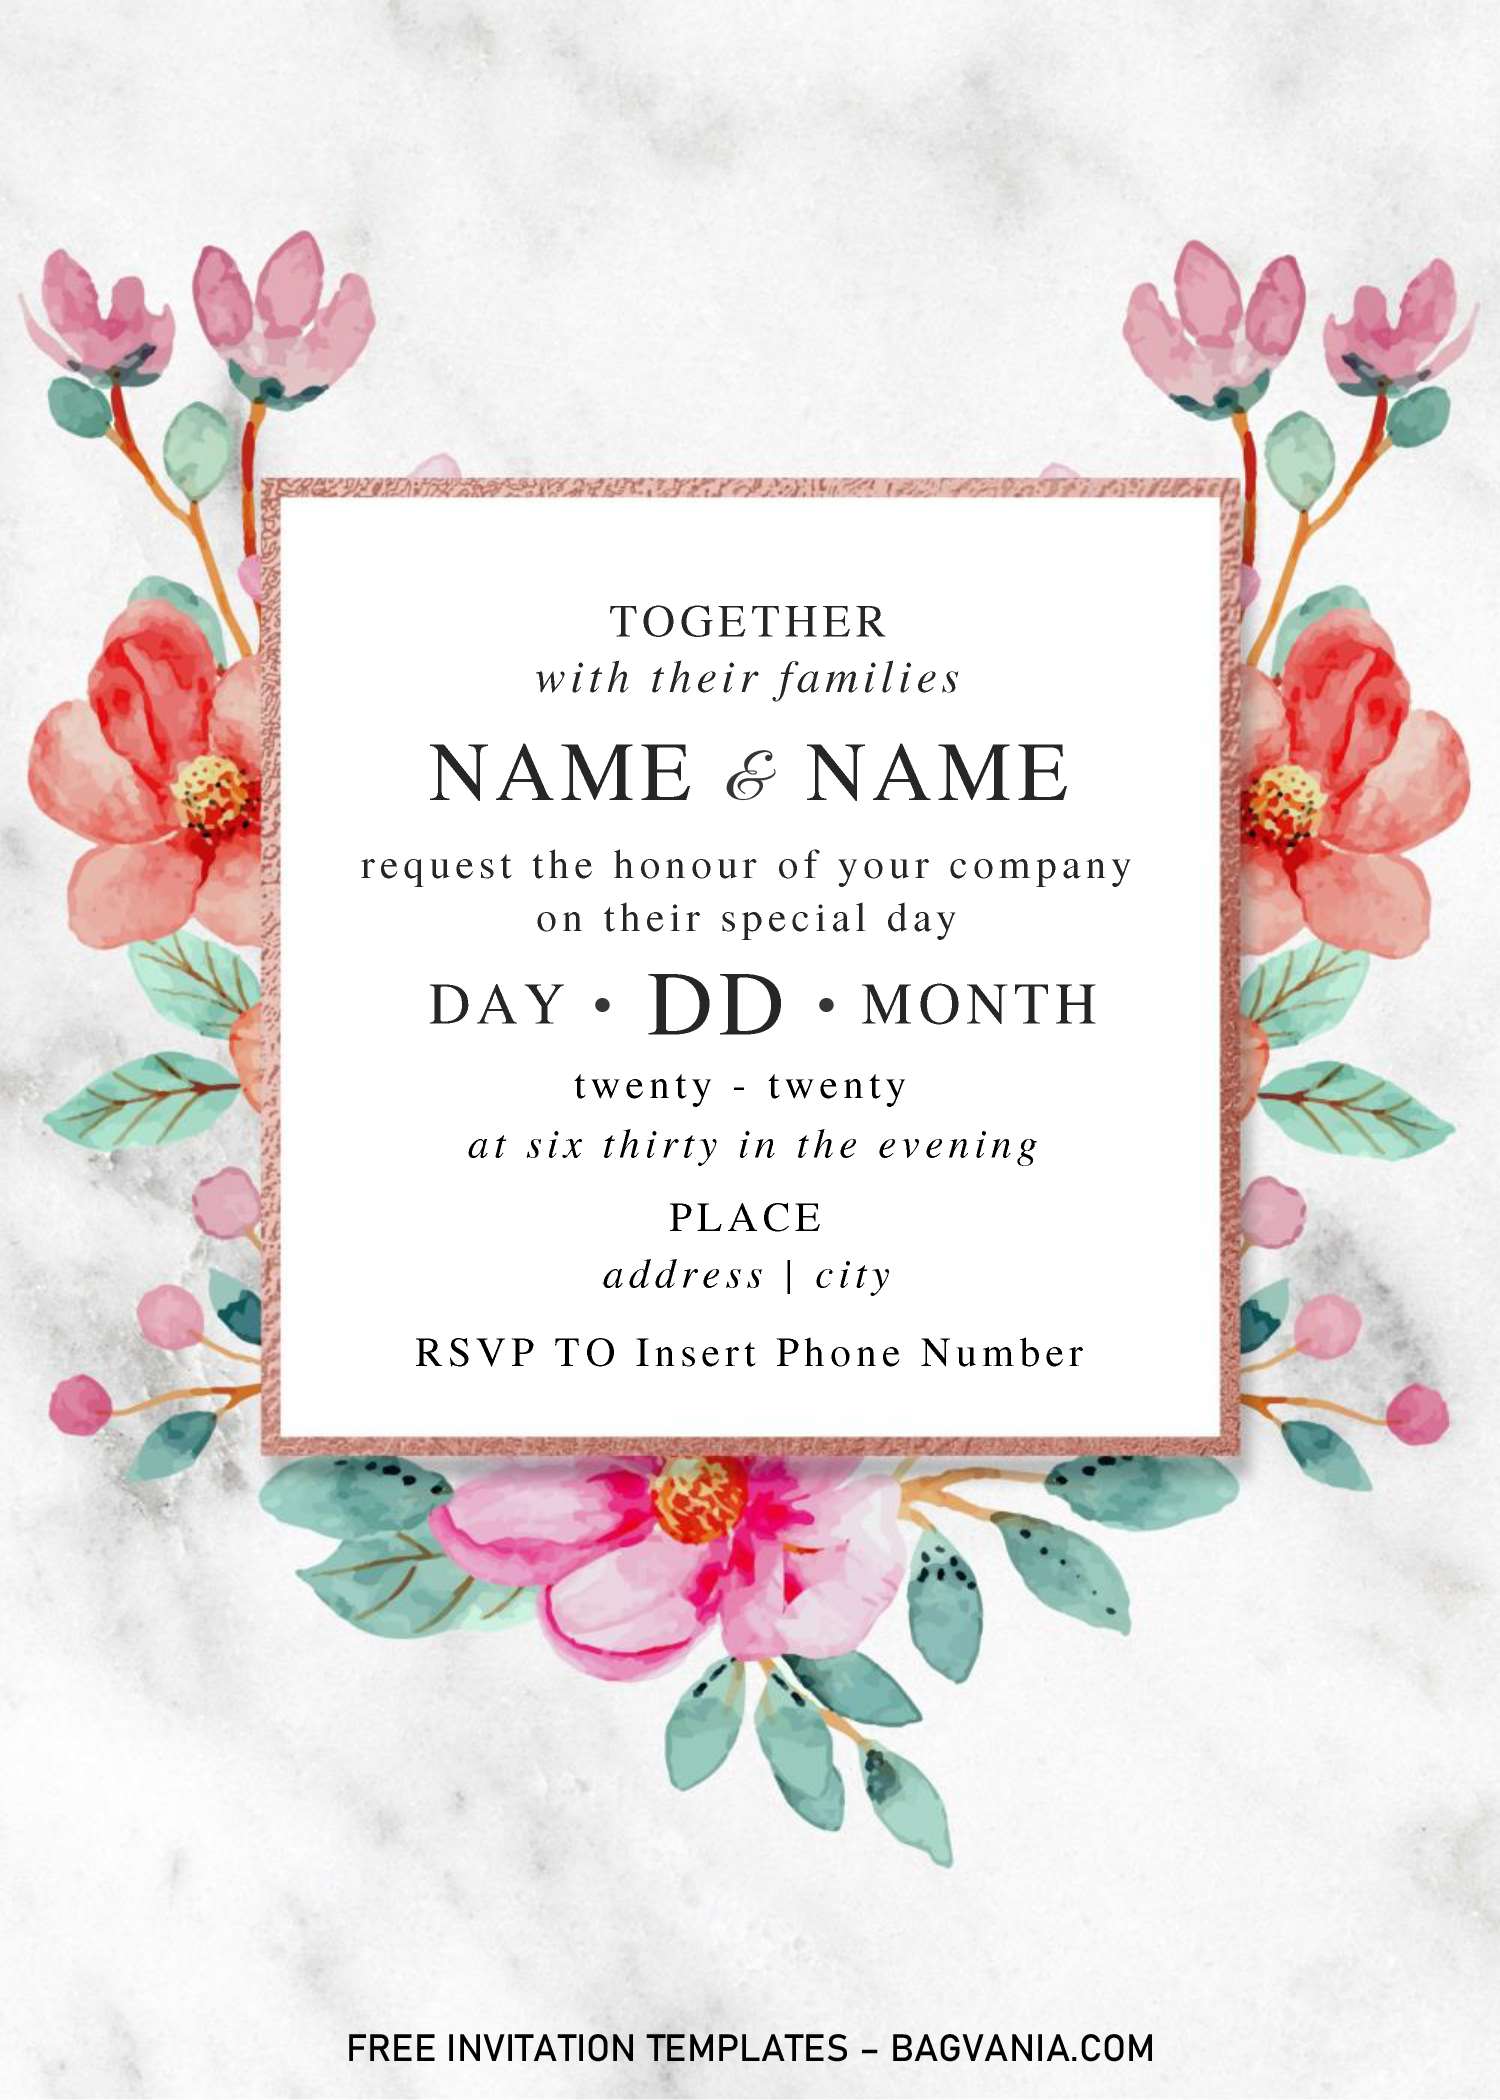 Downloadable Editable Free Wedding Invitation Templates For Word